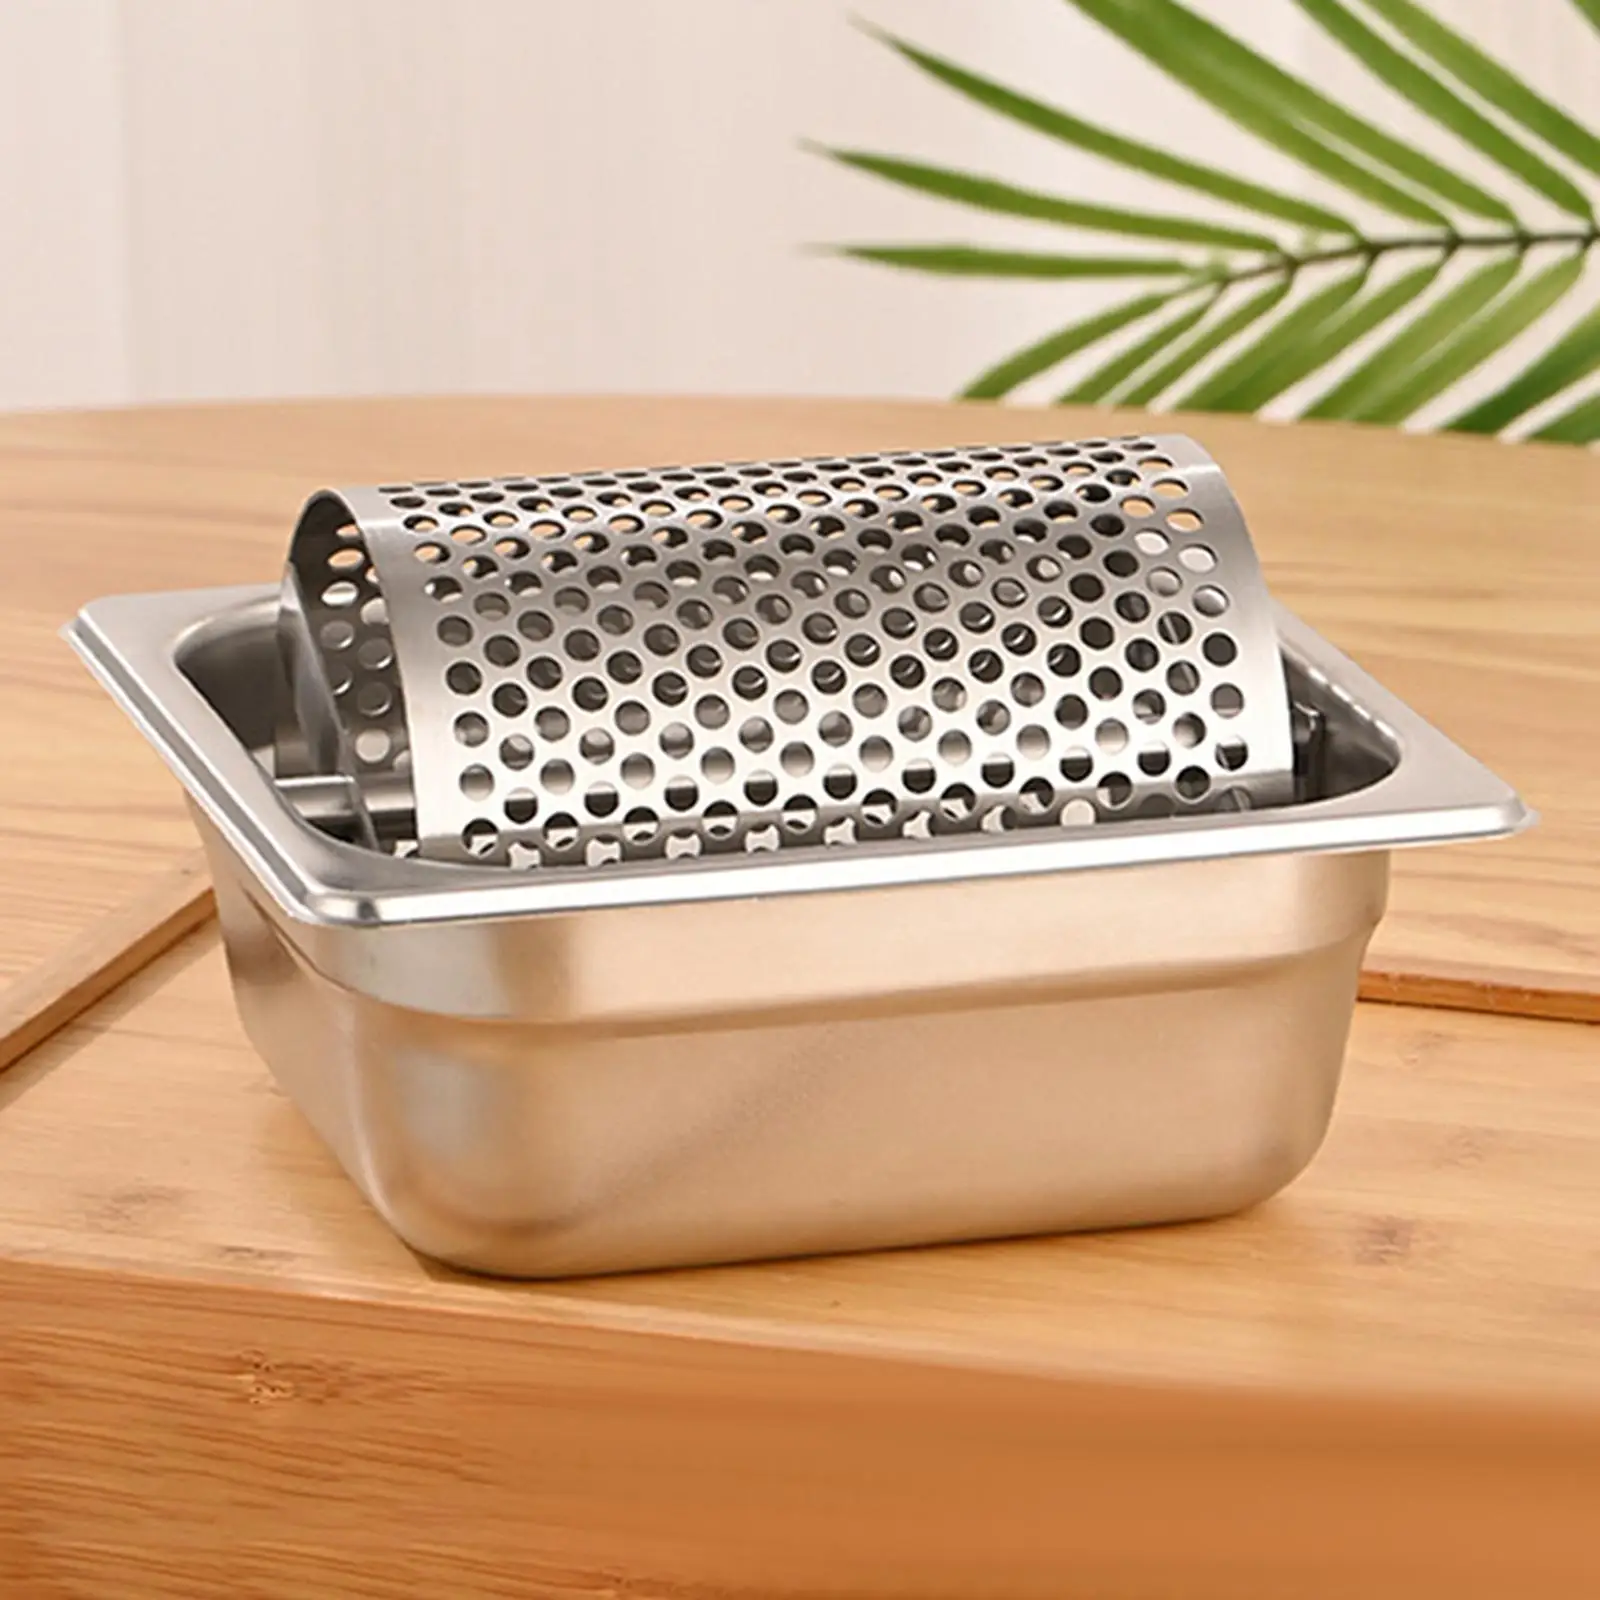 Stainless Steel Butter Roller Convenient Reusable Simple to Use Large Capacity Multifunction Efficient Durable for Kitchen